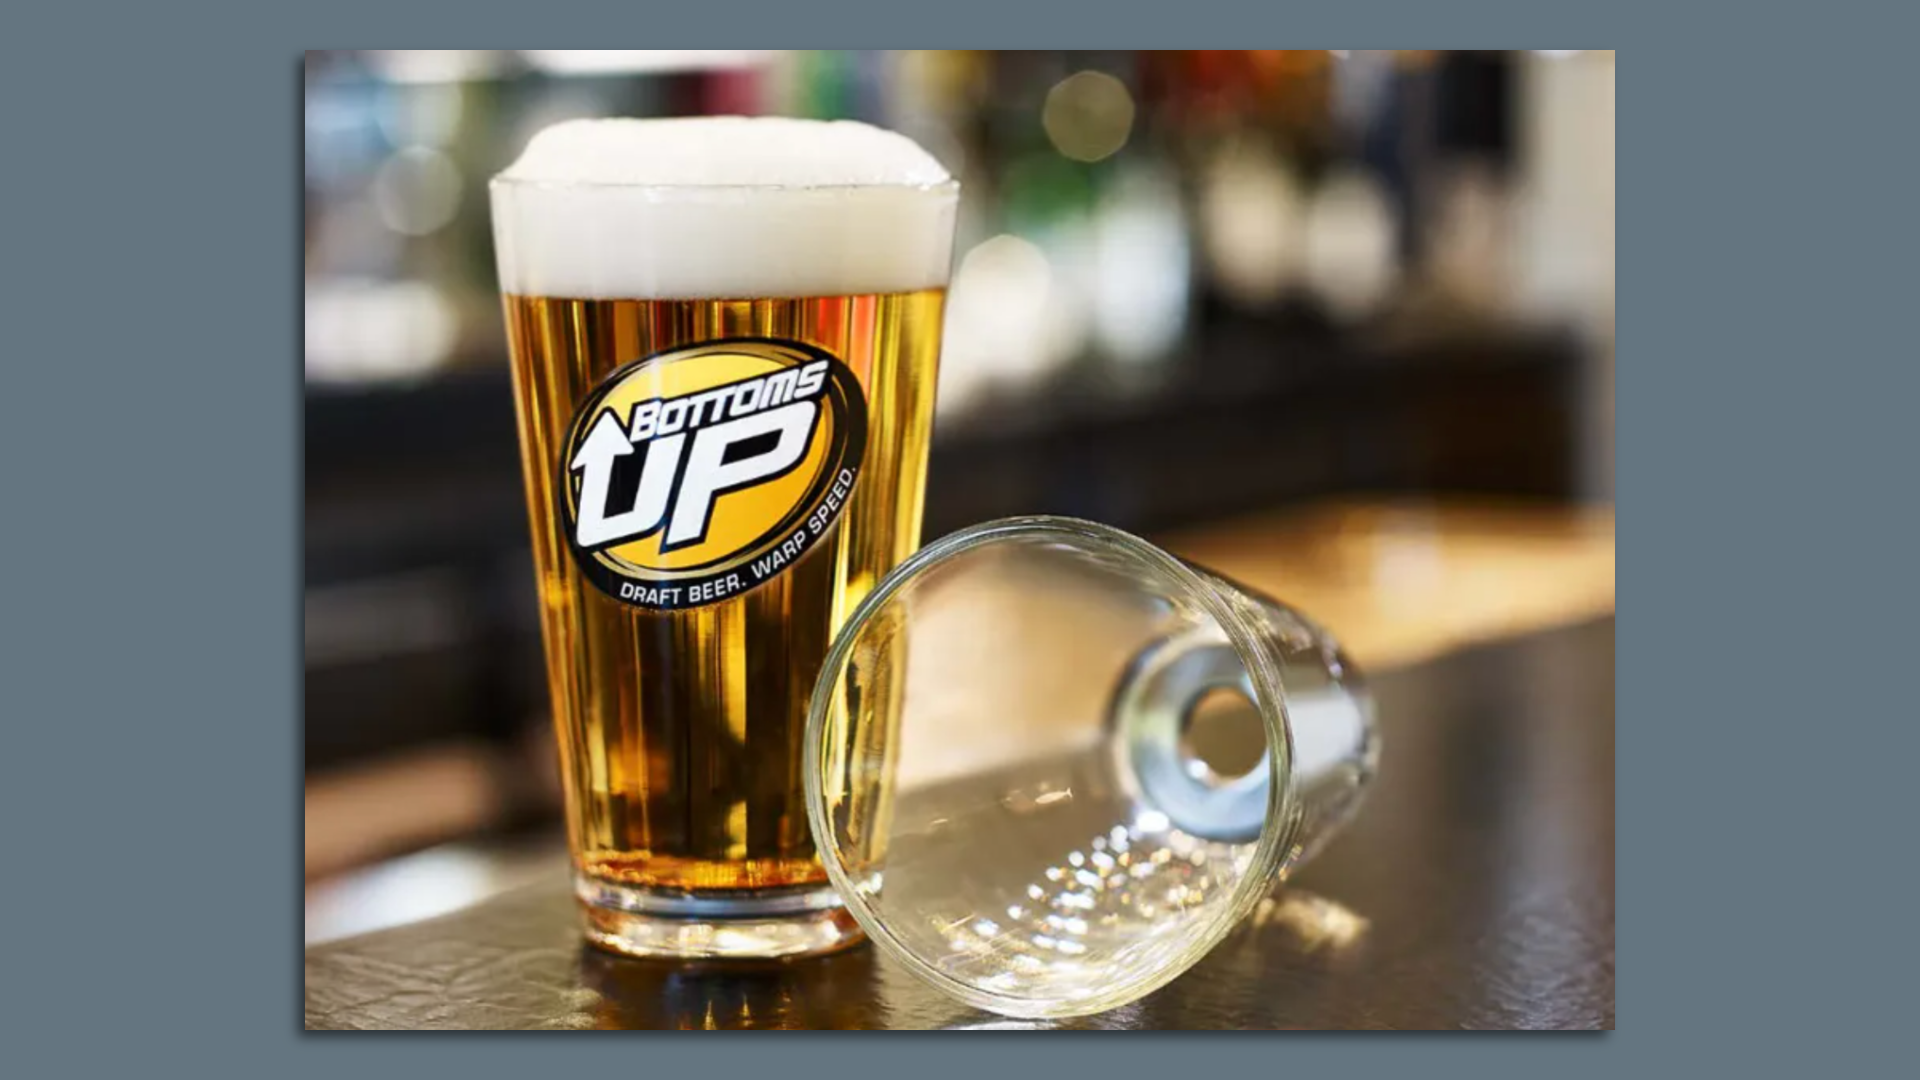 The hole in the bottom of a Bottoms Up glass gets plugged by a removable magnet. Photo courtesy of Bottoms Up Draft Beer Systems.